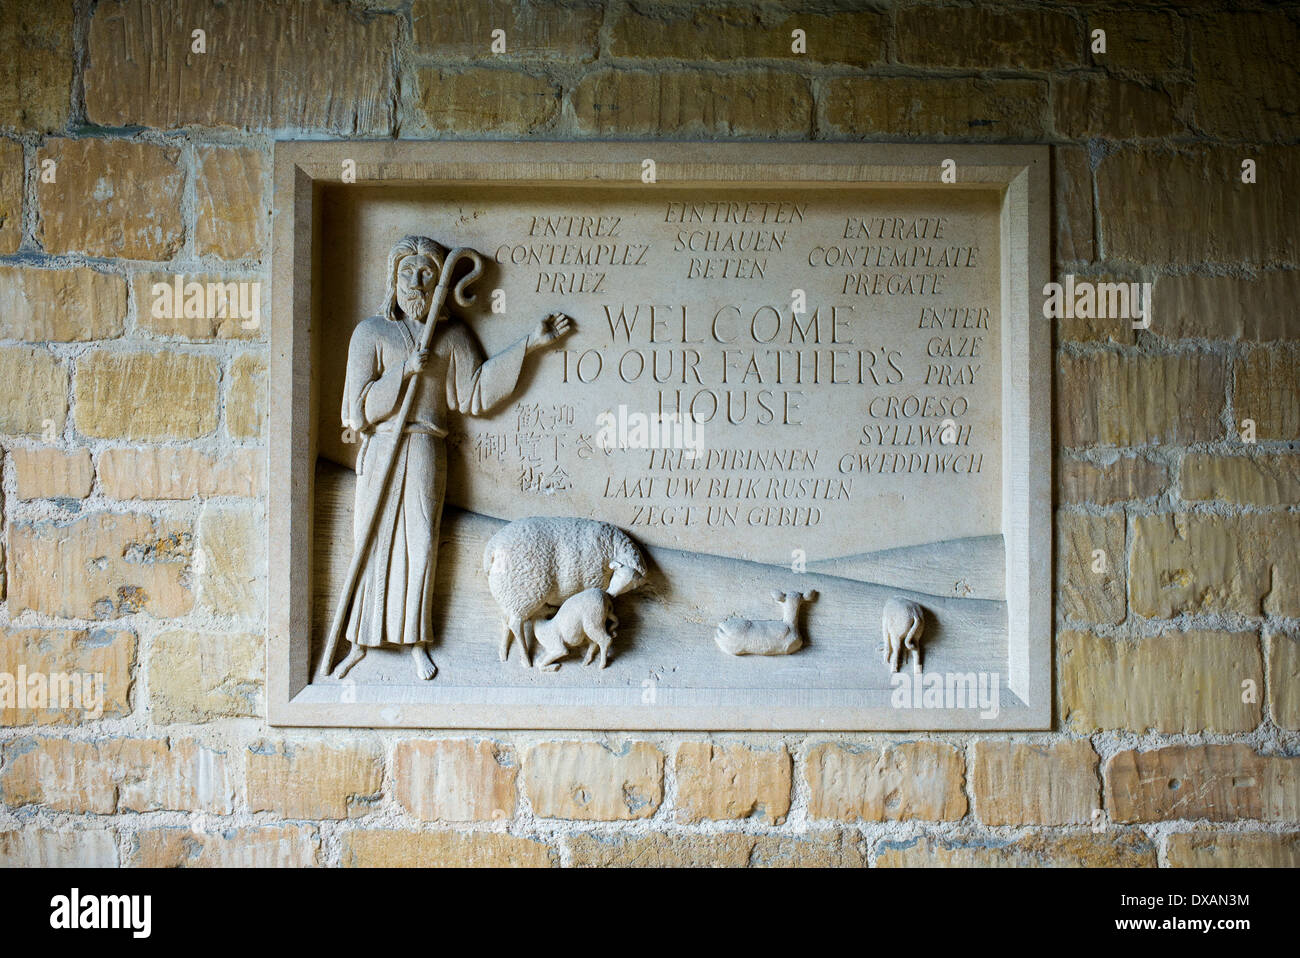 Church Stone Carving, Welcome to our fathers house, Stow on the Wold,  Gloucestershire, Cotswolds, England Stock Photo